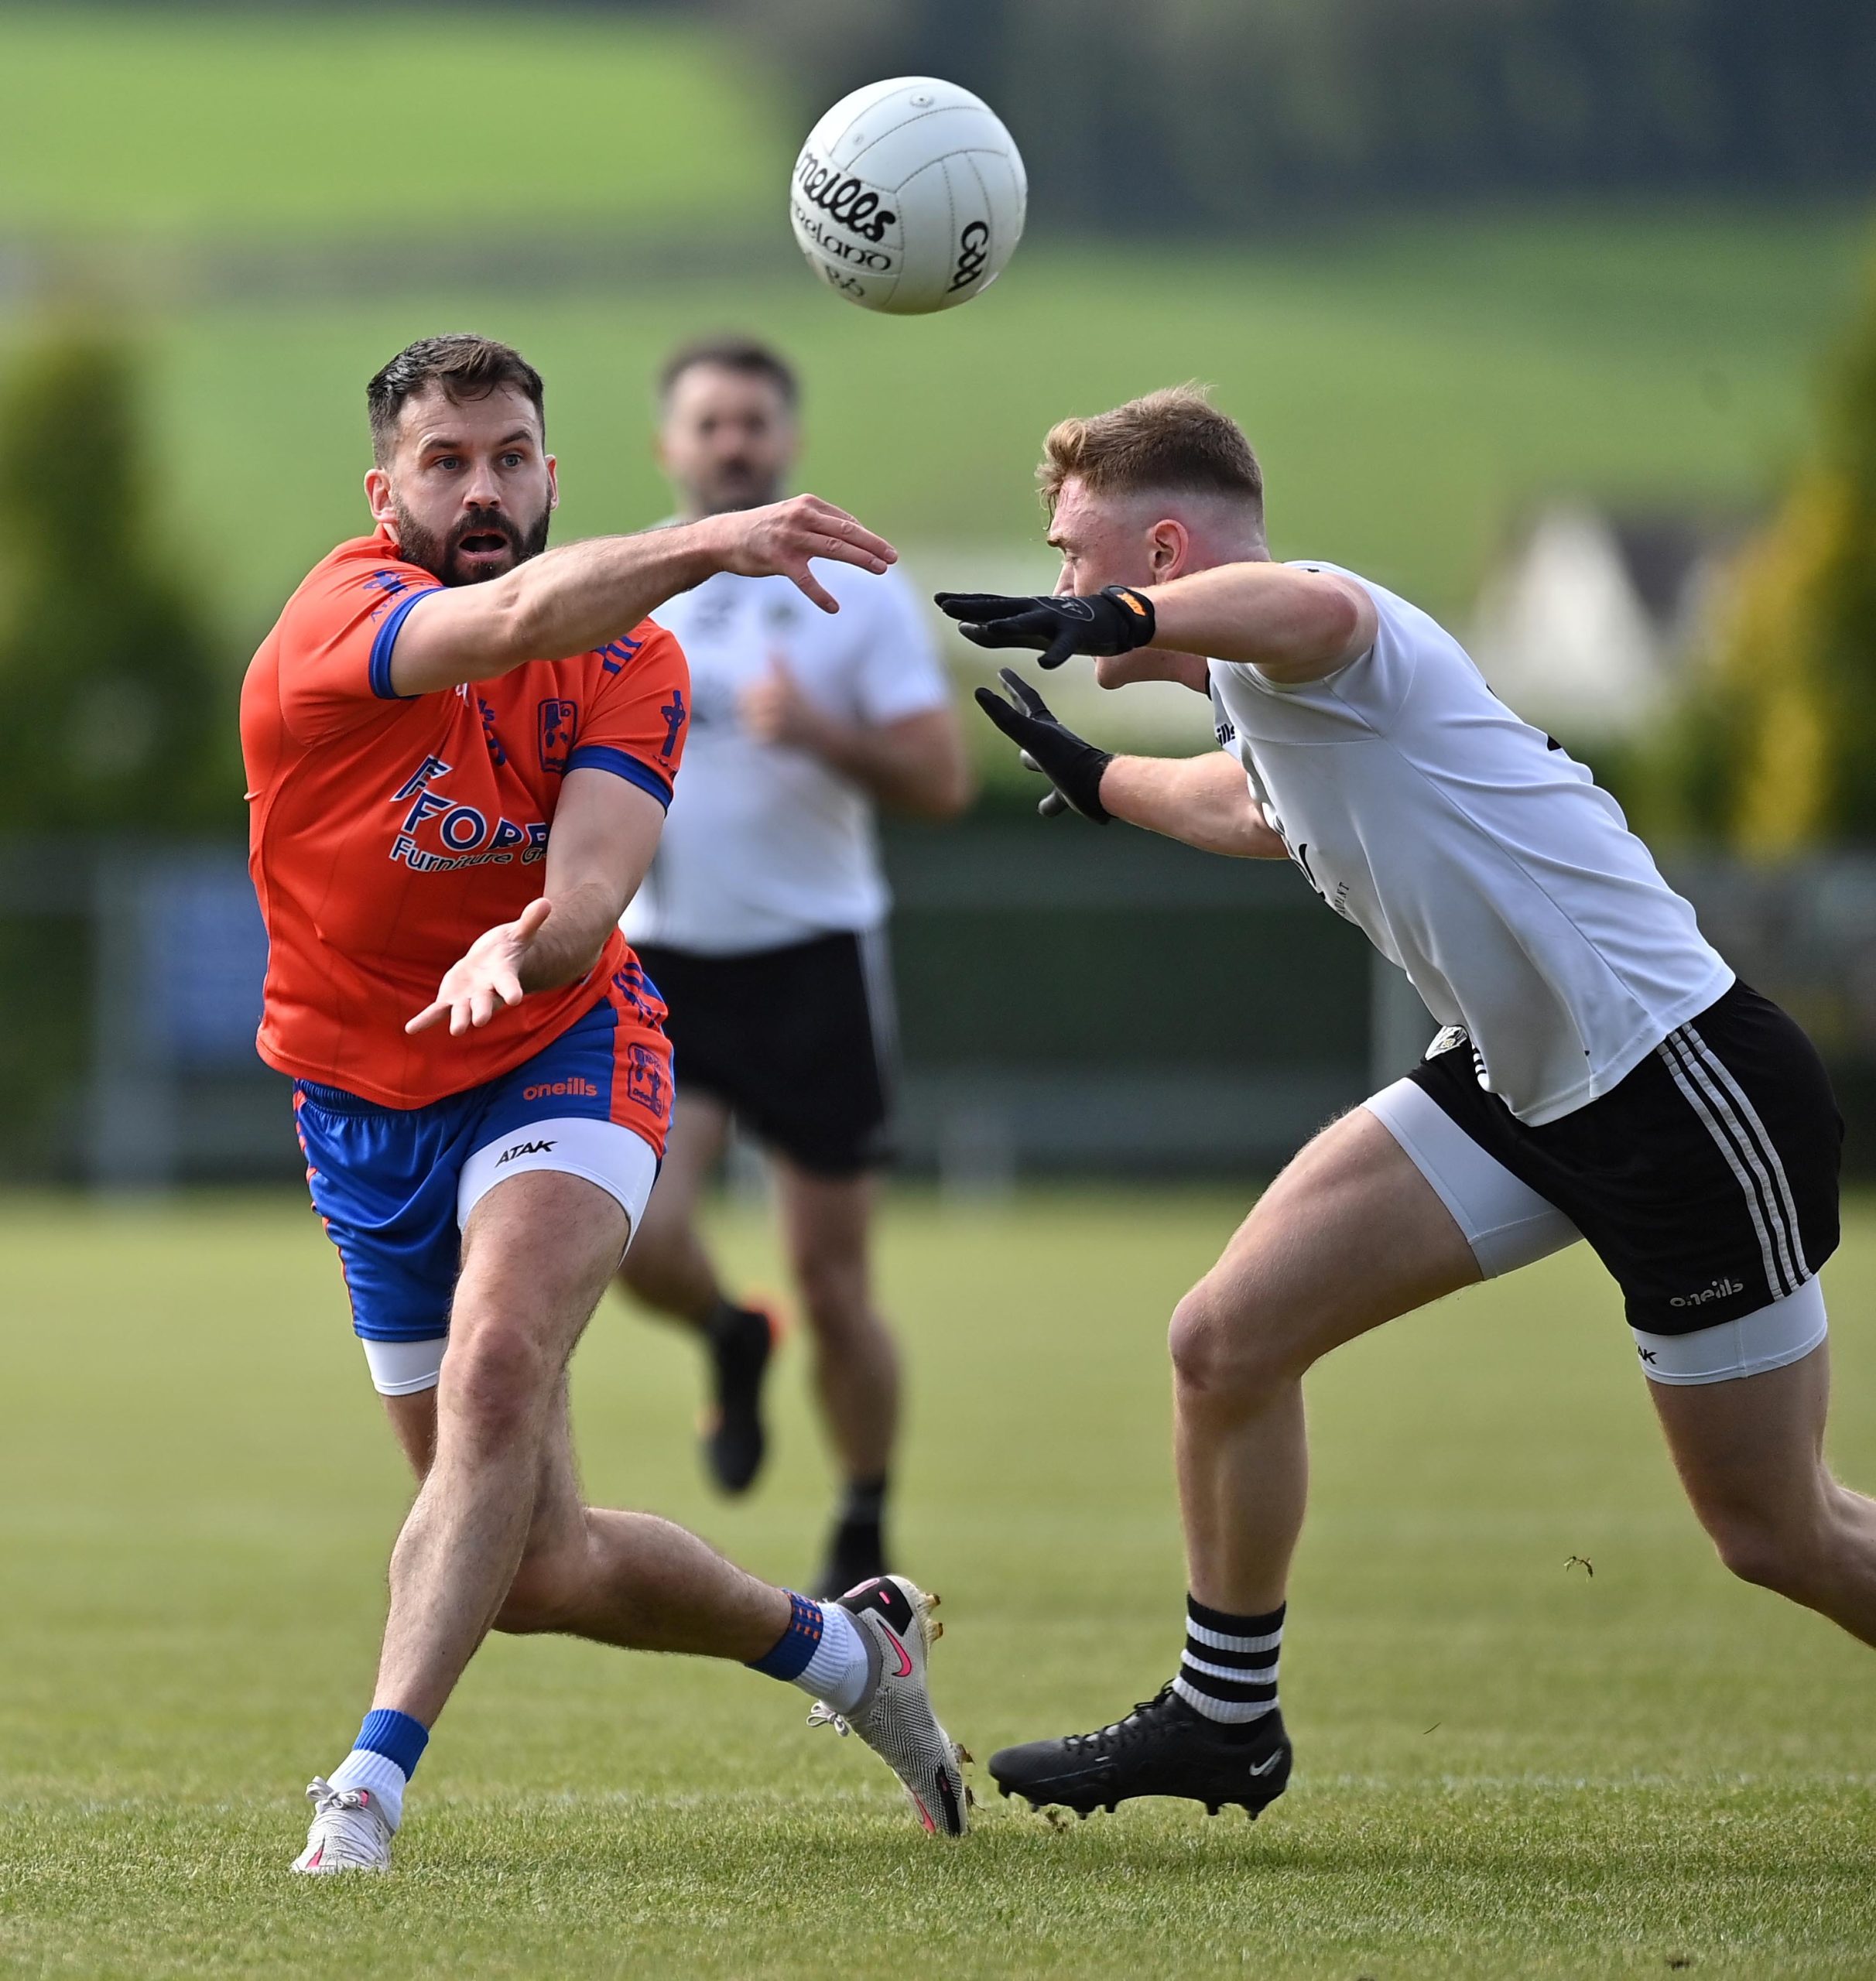 Omagh exit at the hands of Ardboe